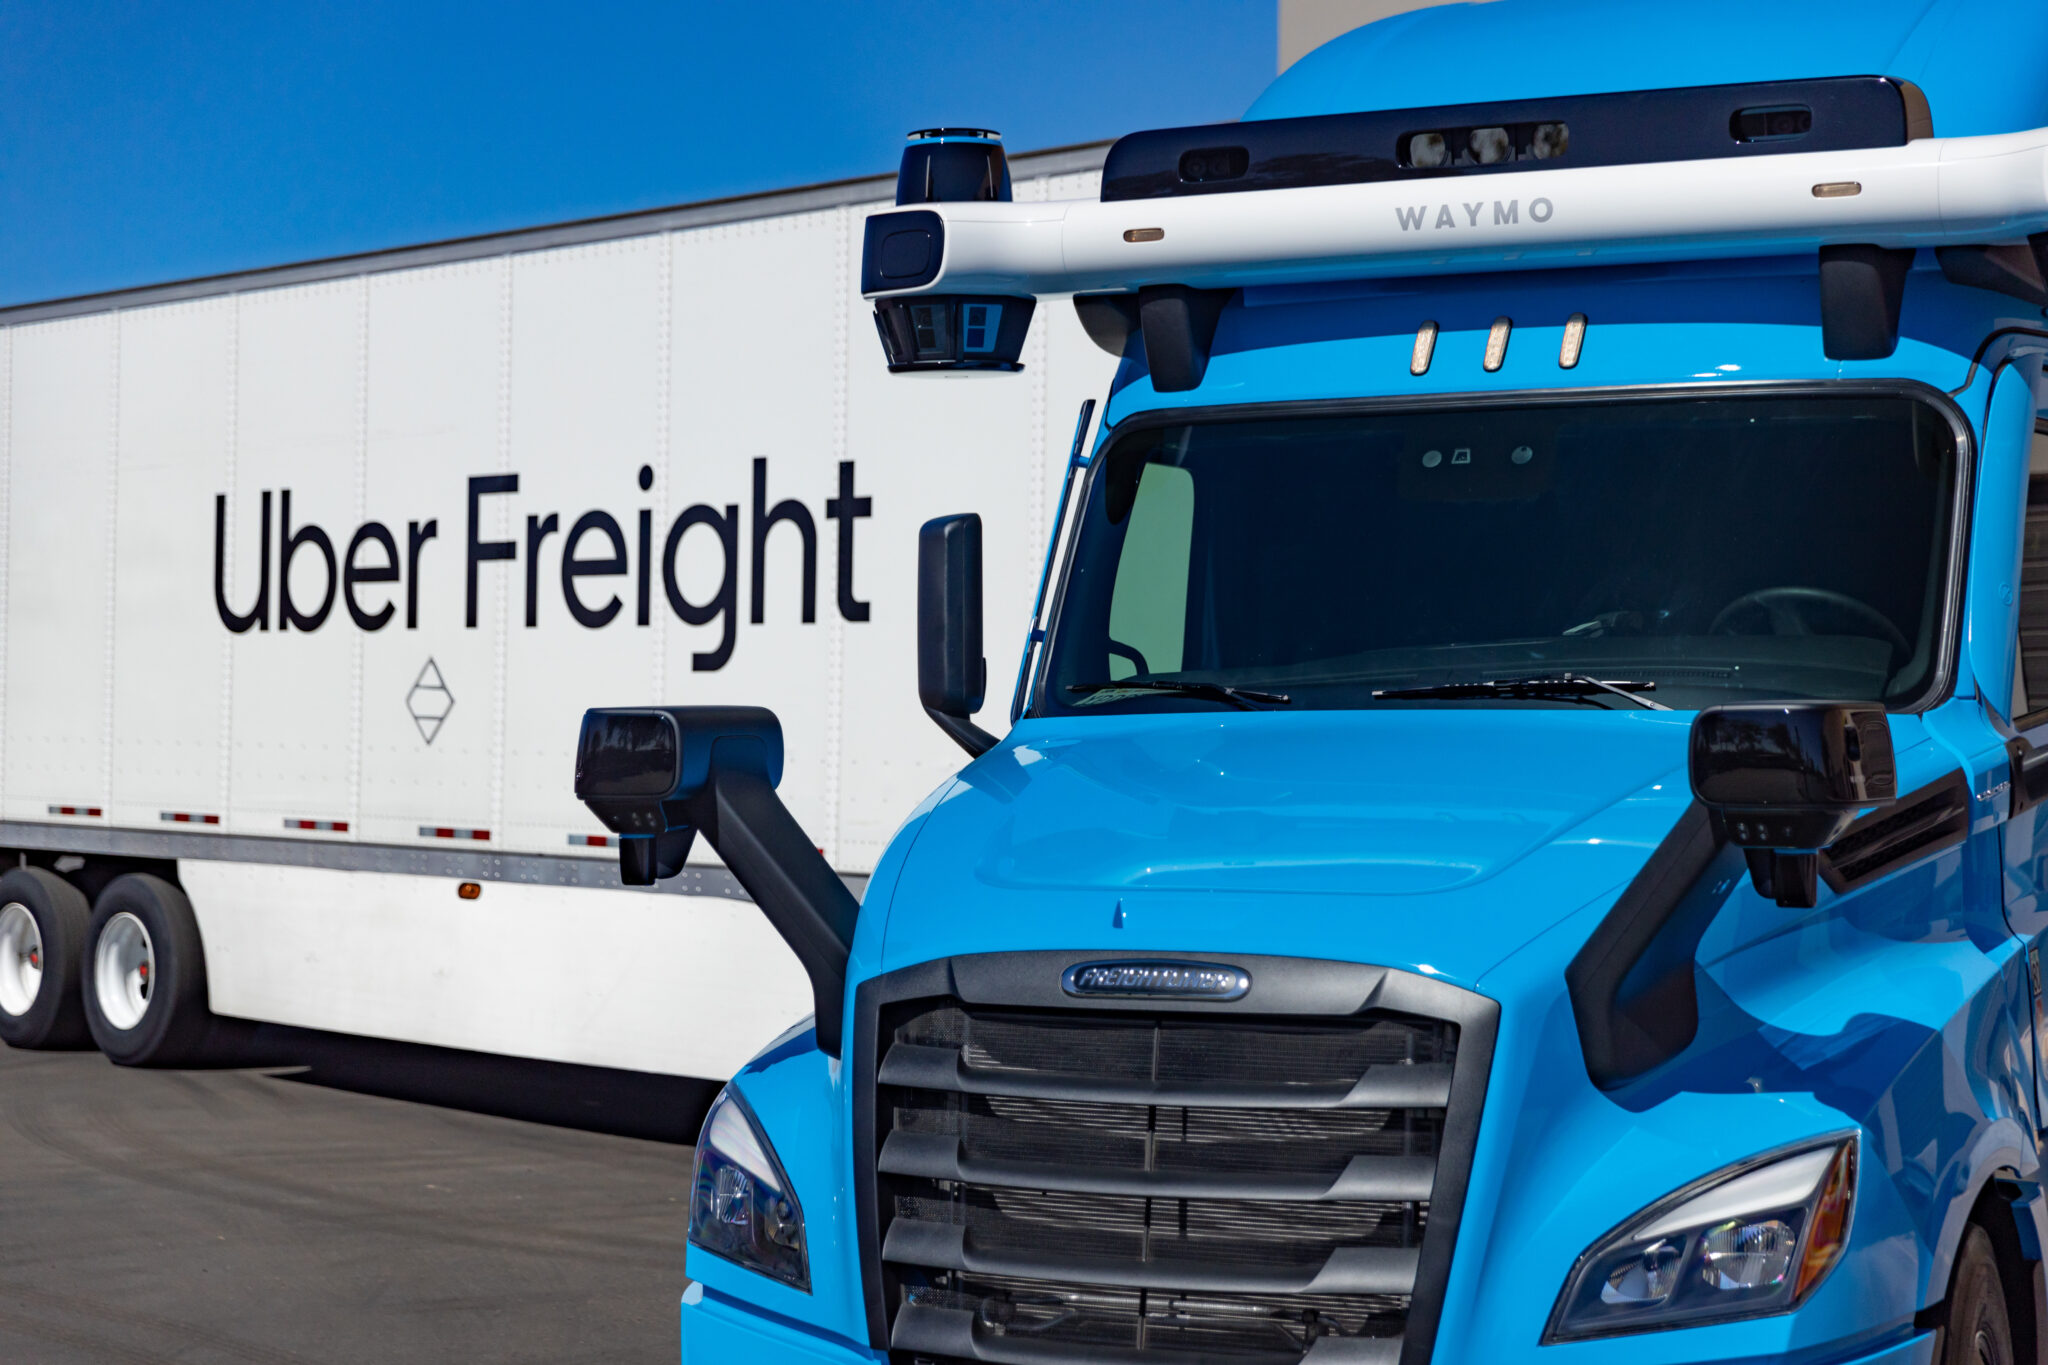 Uber Freight and Waymo Via partner to accelerate the future of